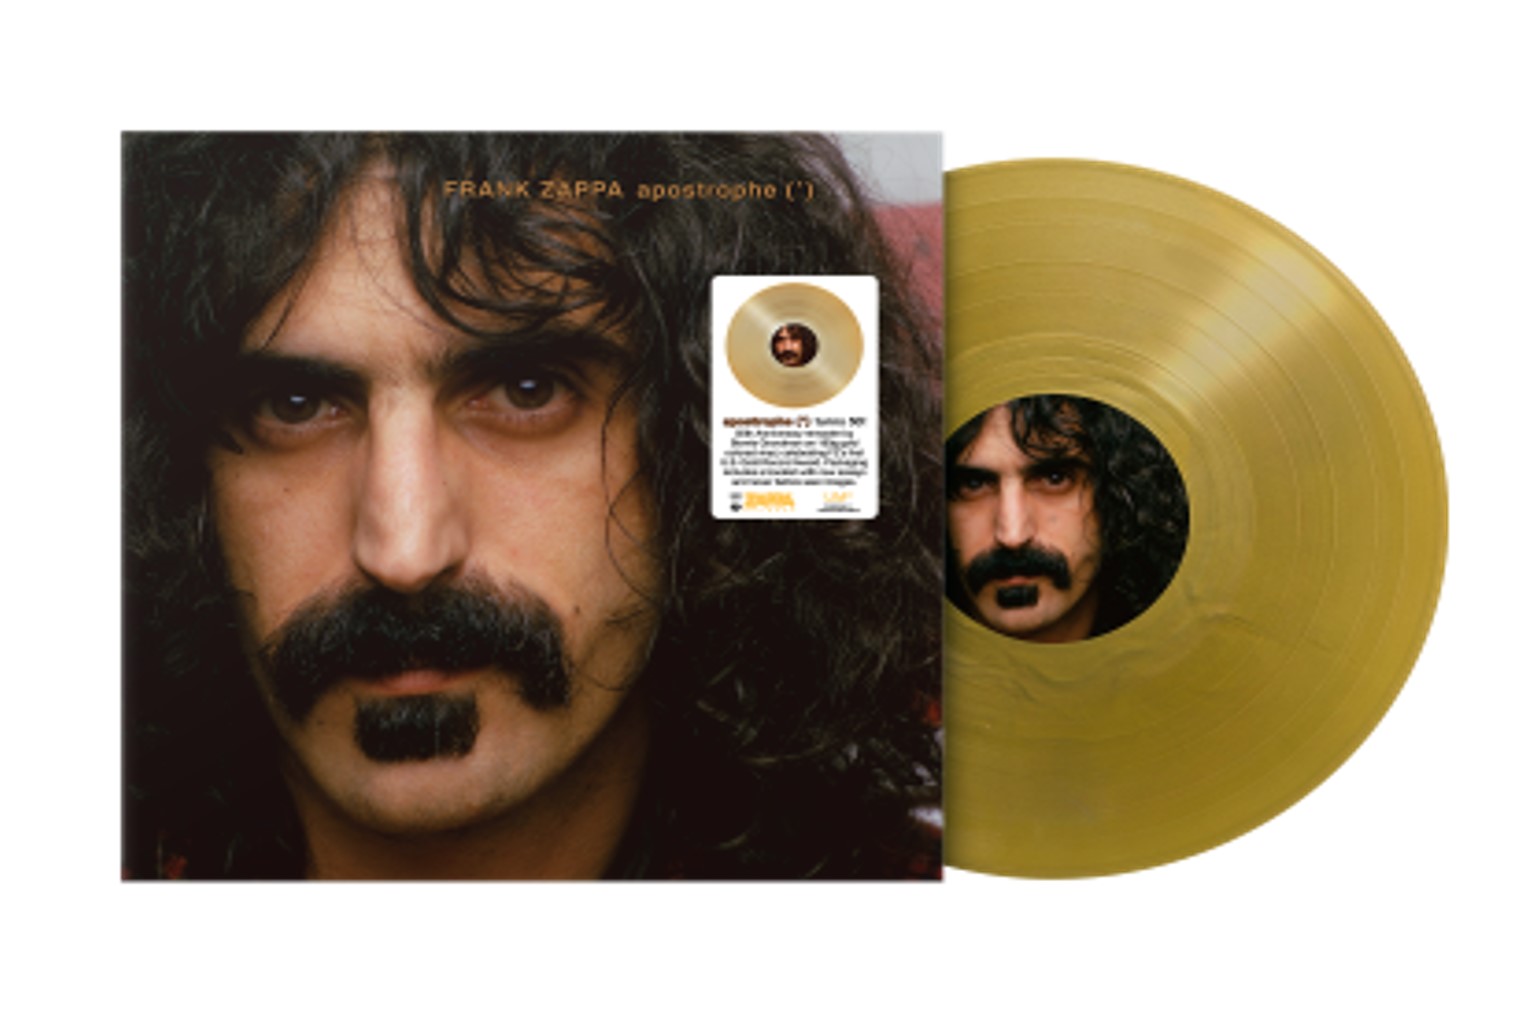 FRANK ZAPPA (& THE MOTHERS OF INVENTION) / フランク・ザッパ / APOSTROPHE(') 50TH ANNIVERSARY (COLOUR LP)